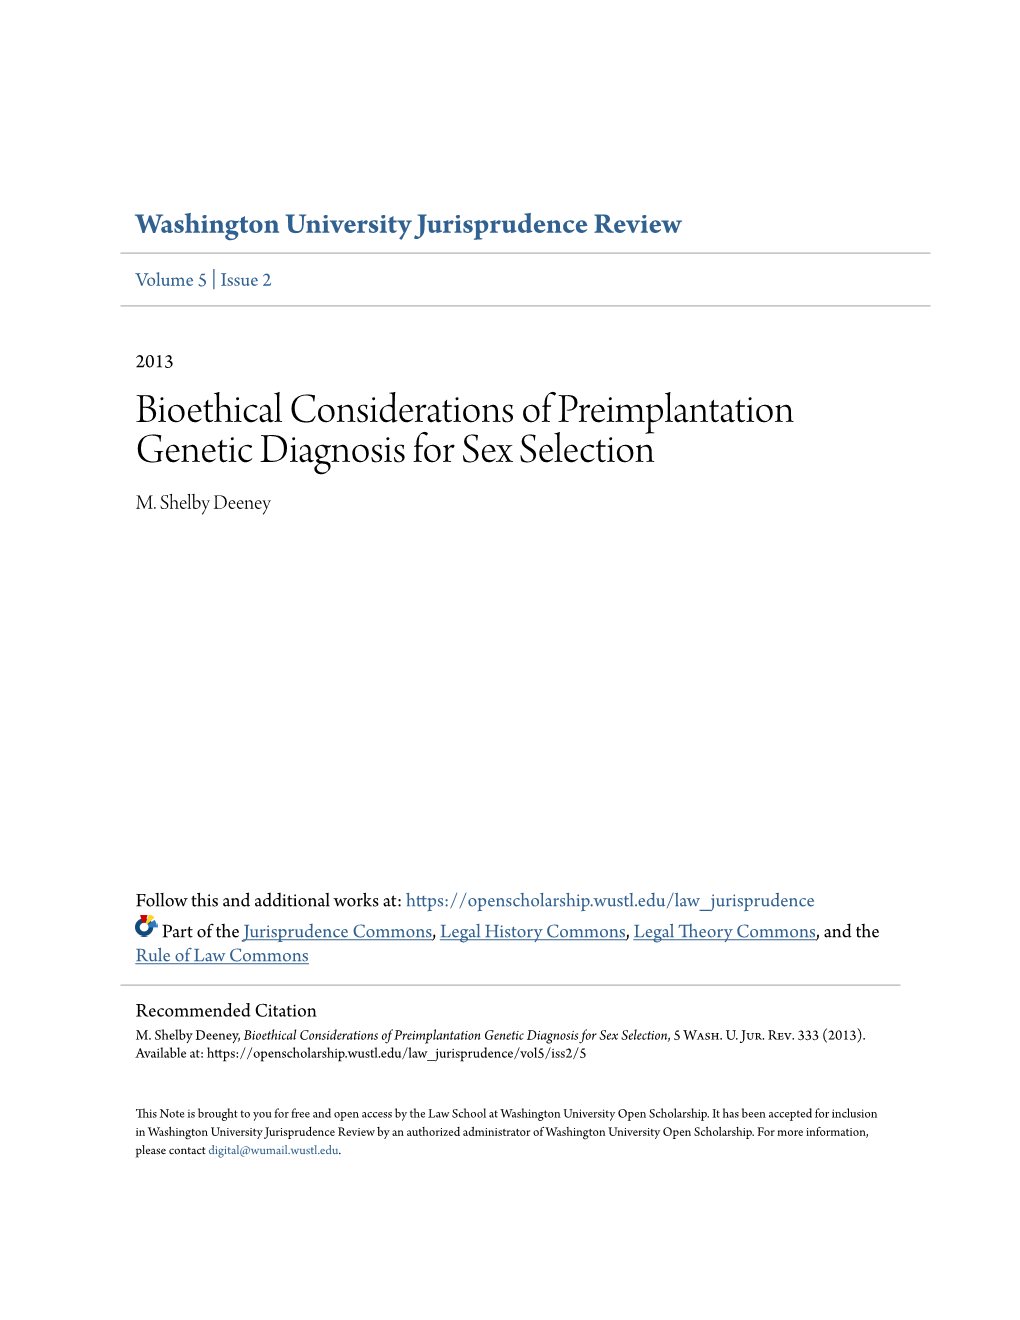 Bioethical Considerations of Preimplantation Genetic Diagnosis for Sex Selection M